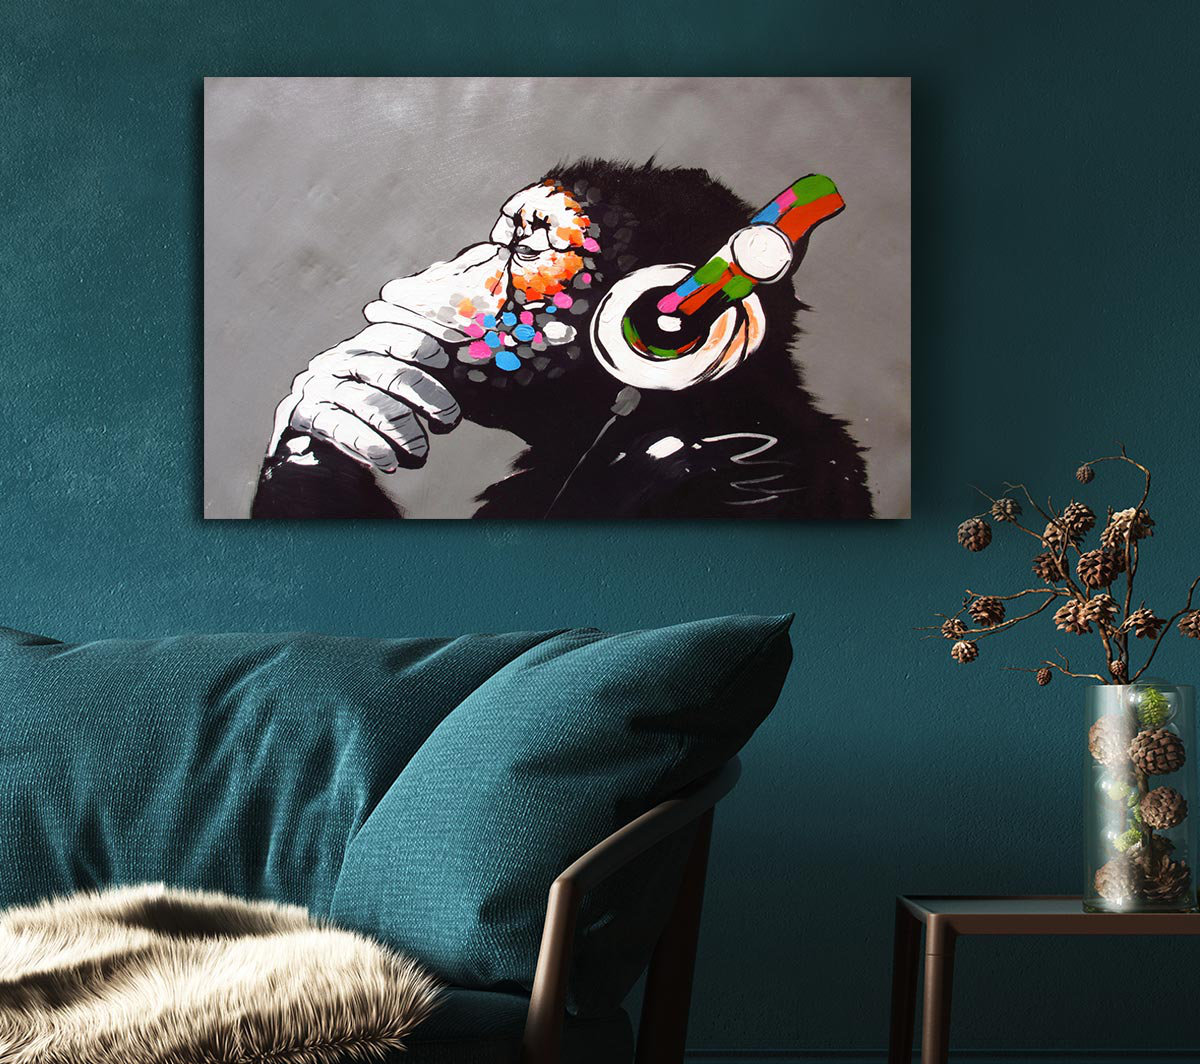 Urban Home Chimp Headphones Thinking Banksy Canvas Print Wall Art by Banksy - Wrapped Canvas Graphic Art & | Wayfair.co.uk